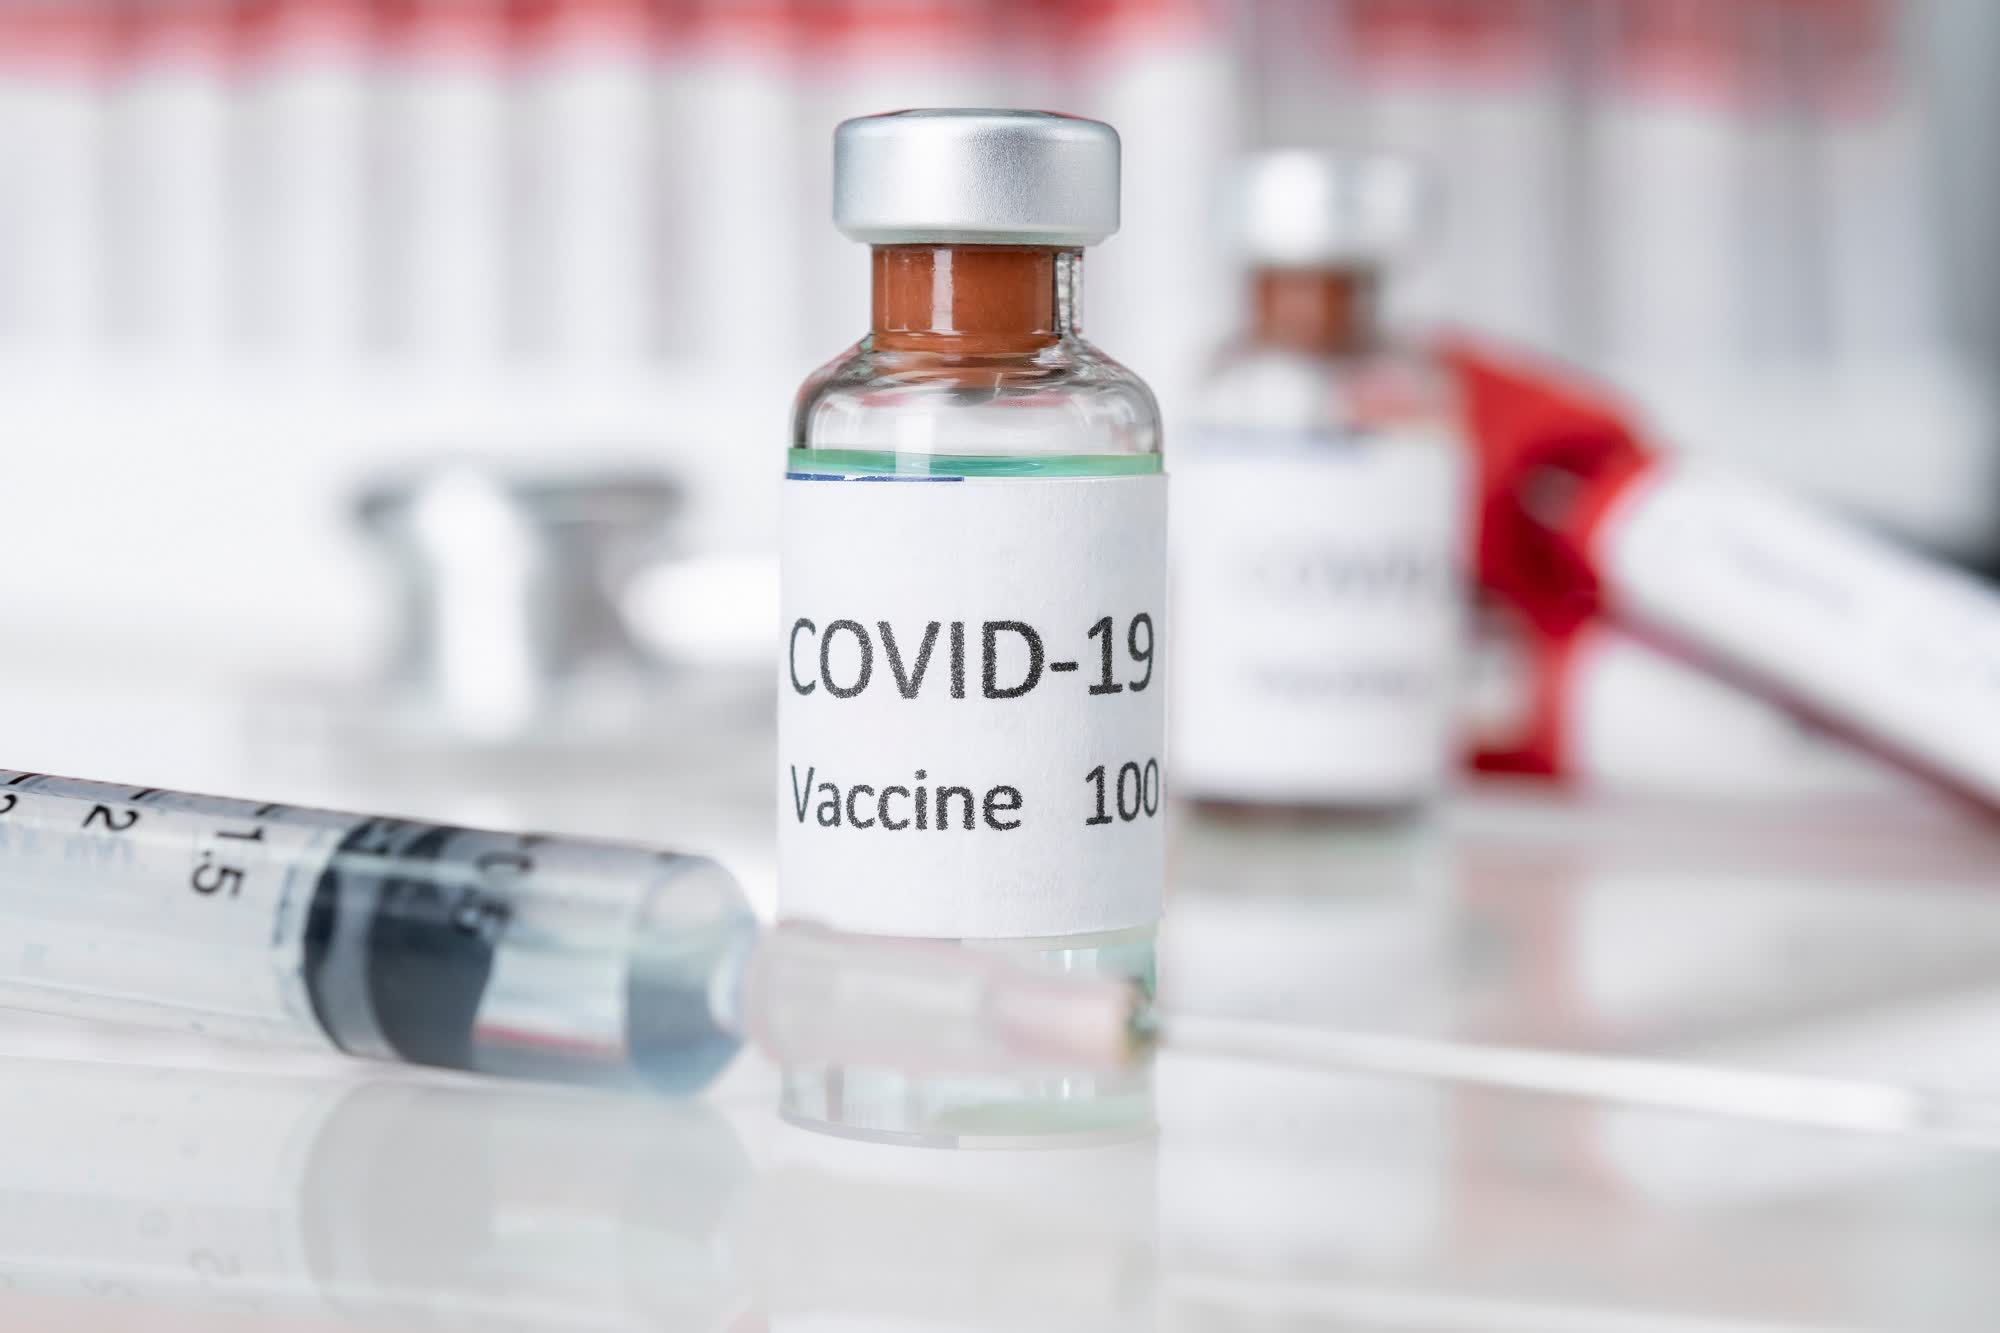 News of Covid-19 vaccine with 90% effectiveness sees pandemic-boosted stocks tank